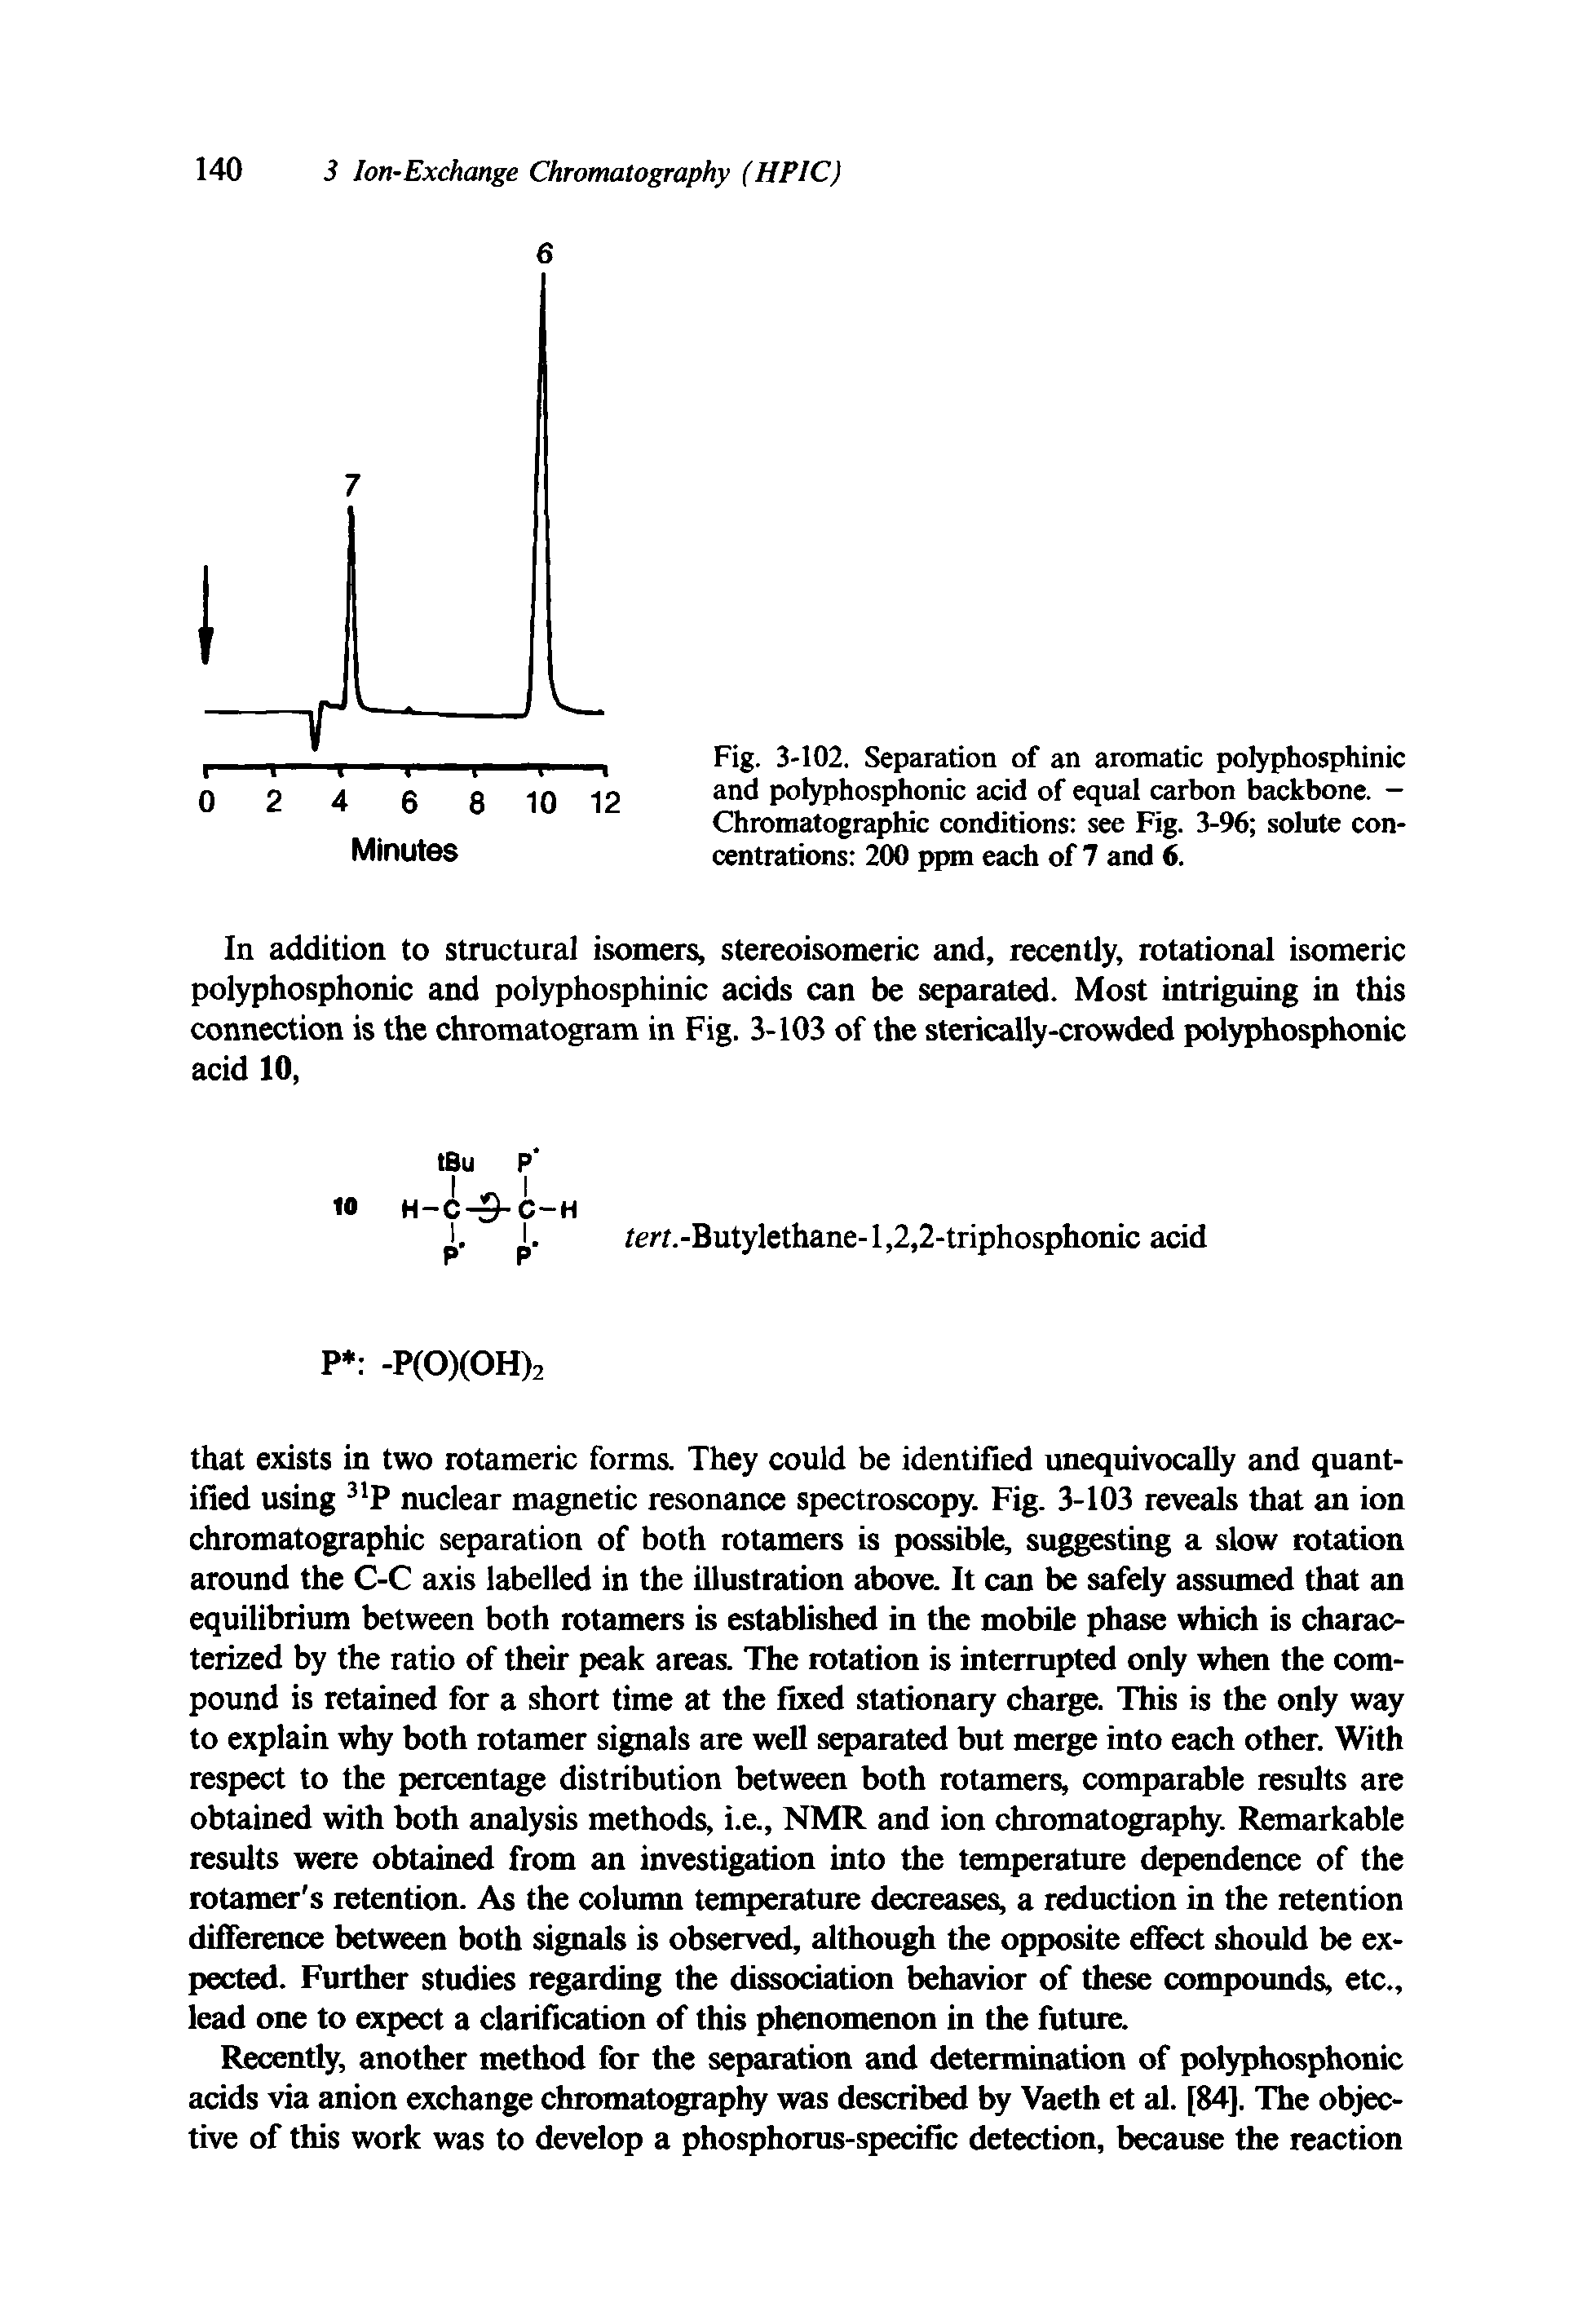 Fig. 3-102. Separation of an aromatic polyphosphinic and polyphosphonic acid of equal carbon backbone. — Chromatographic conditions see Fig. 3-96 solute concentrations 200 ppm each of 7 and 6.